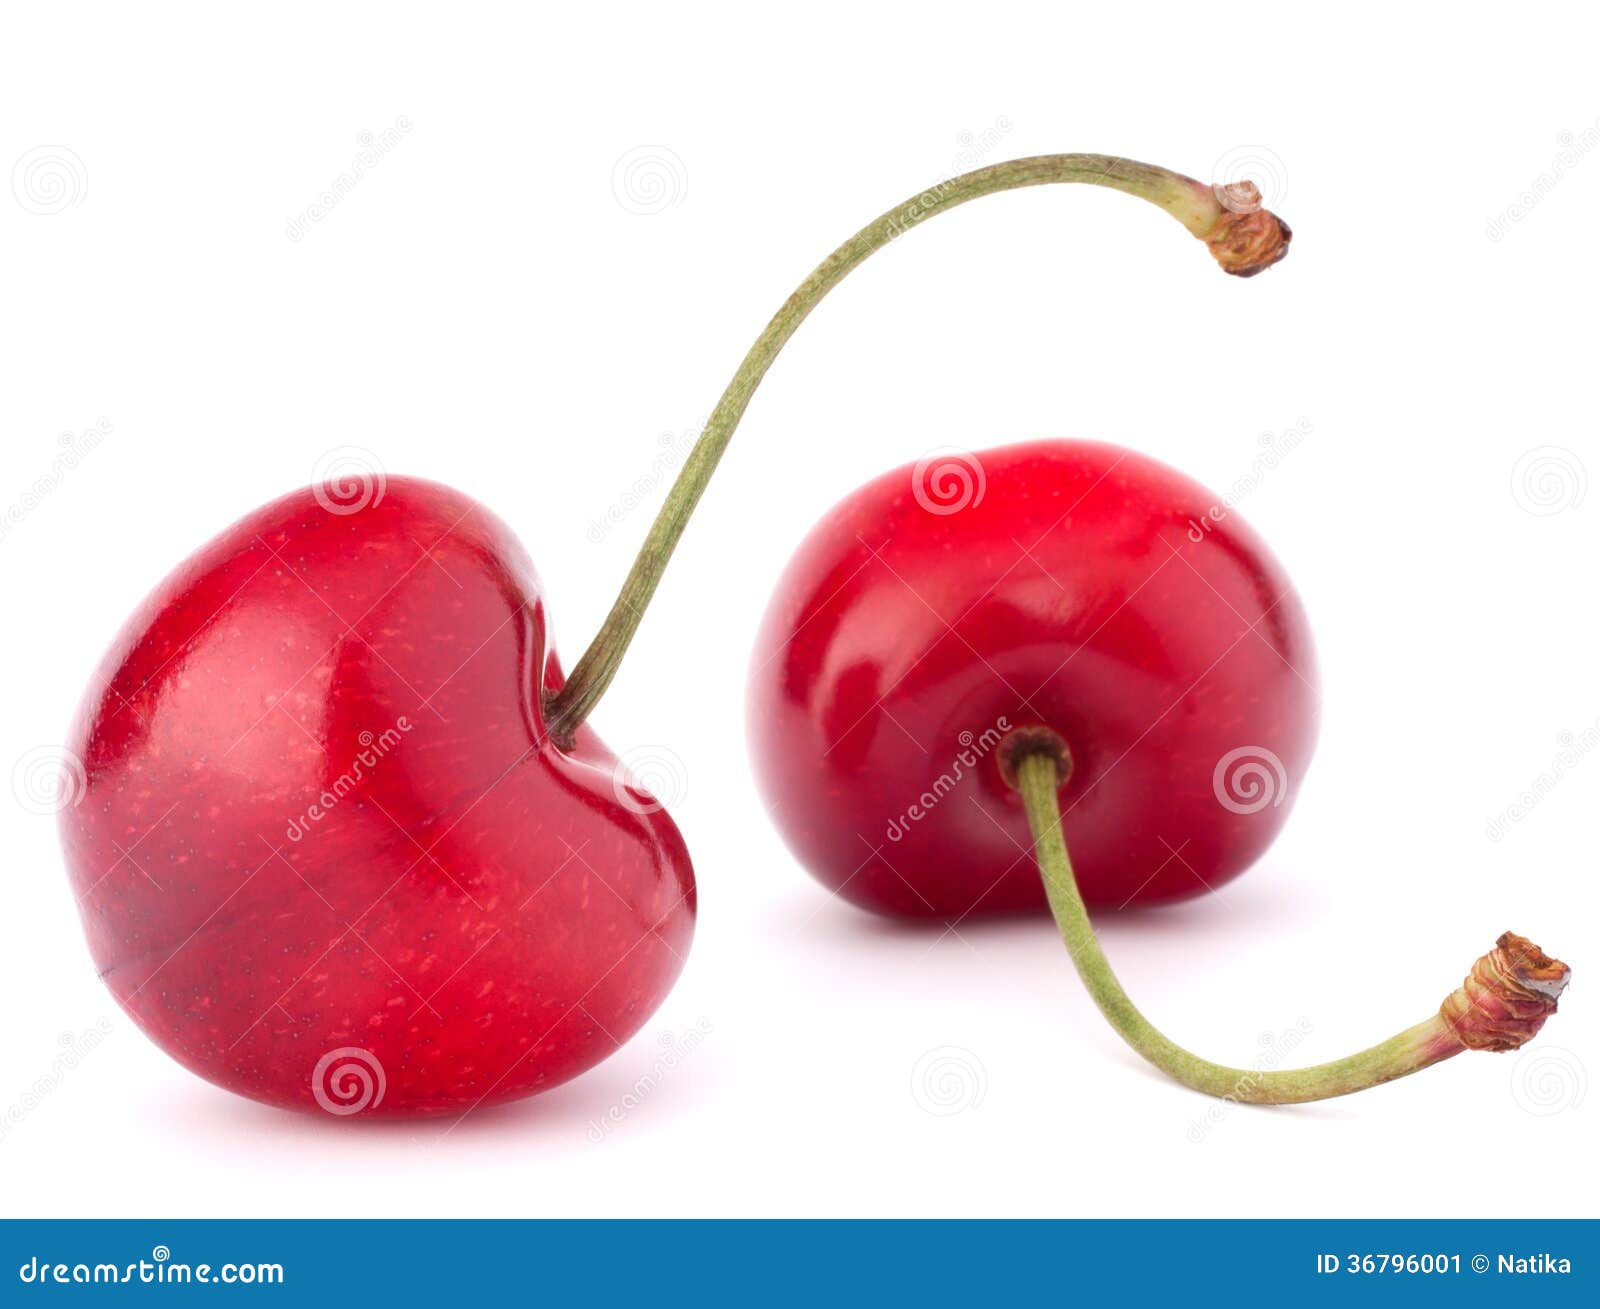 Two Heart Shaped Cherry Berries Stock Image - Image of bright, live ...